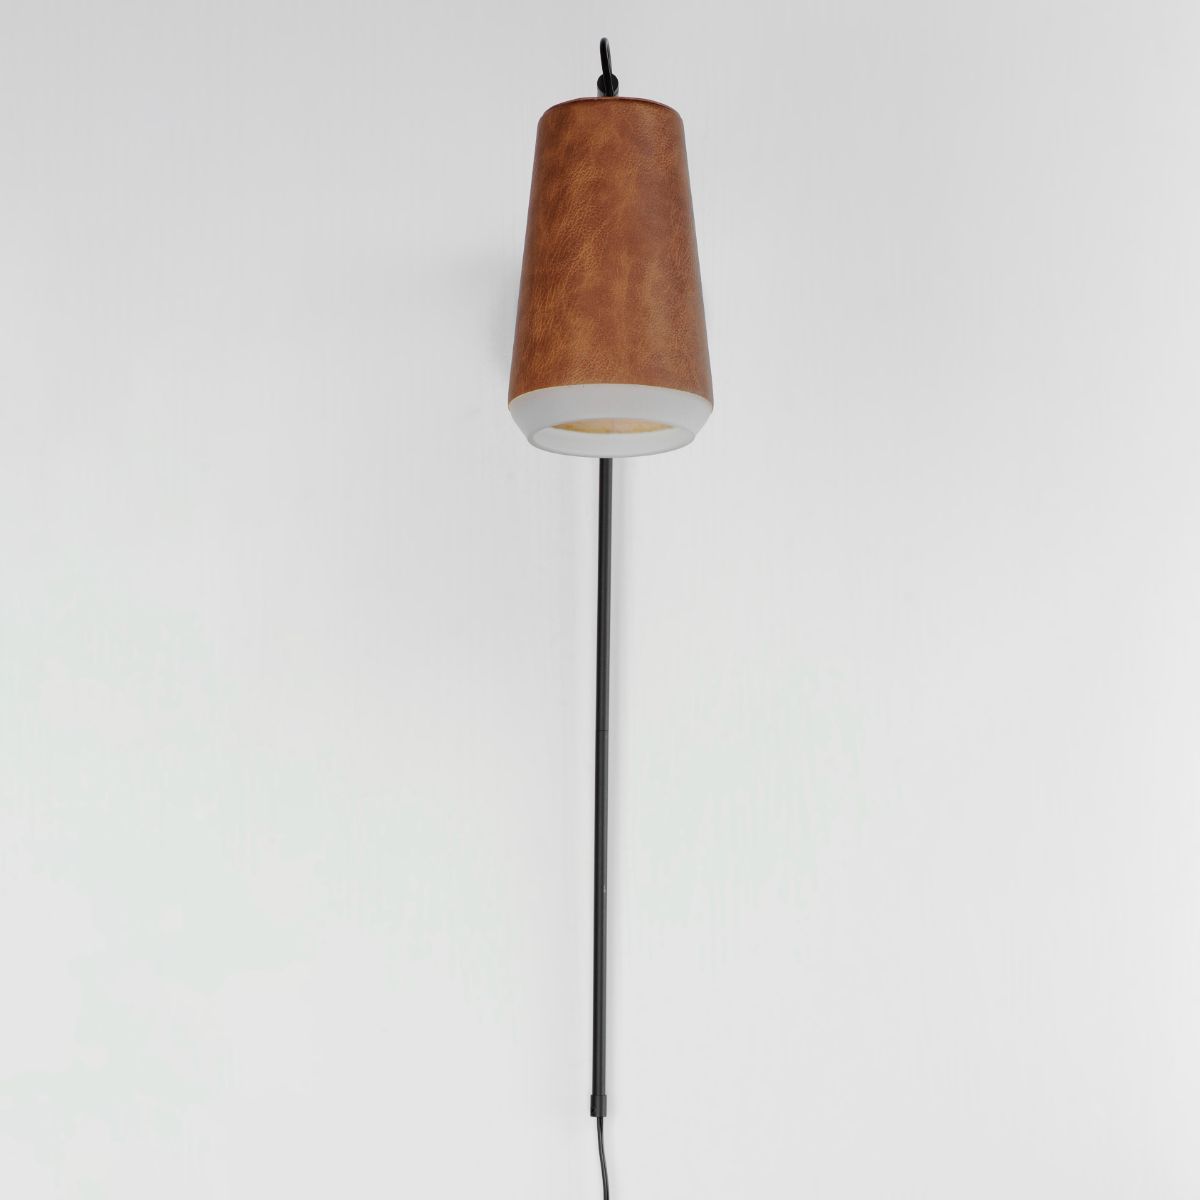 SCOUT 32 in. LED Plug In Swing Arm Wall Sconce Weathered Wood & Tan Leather